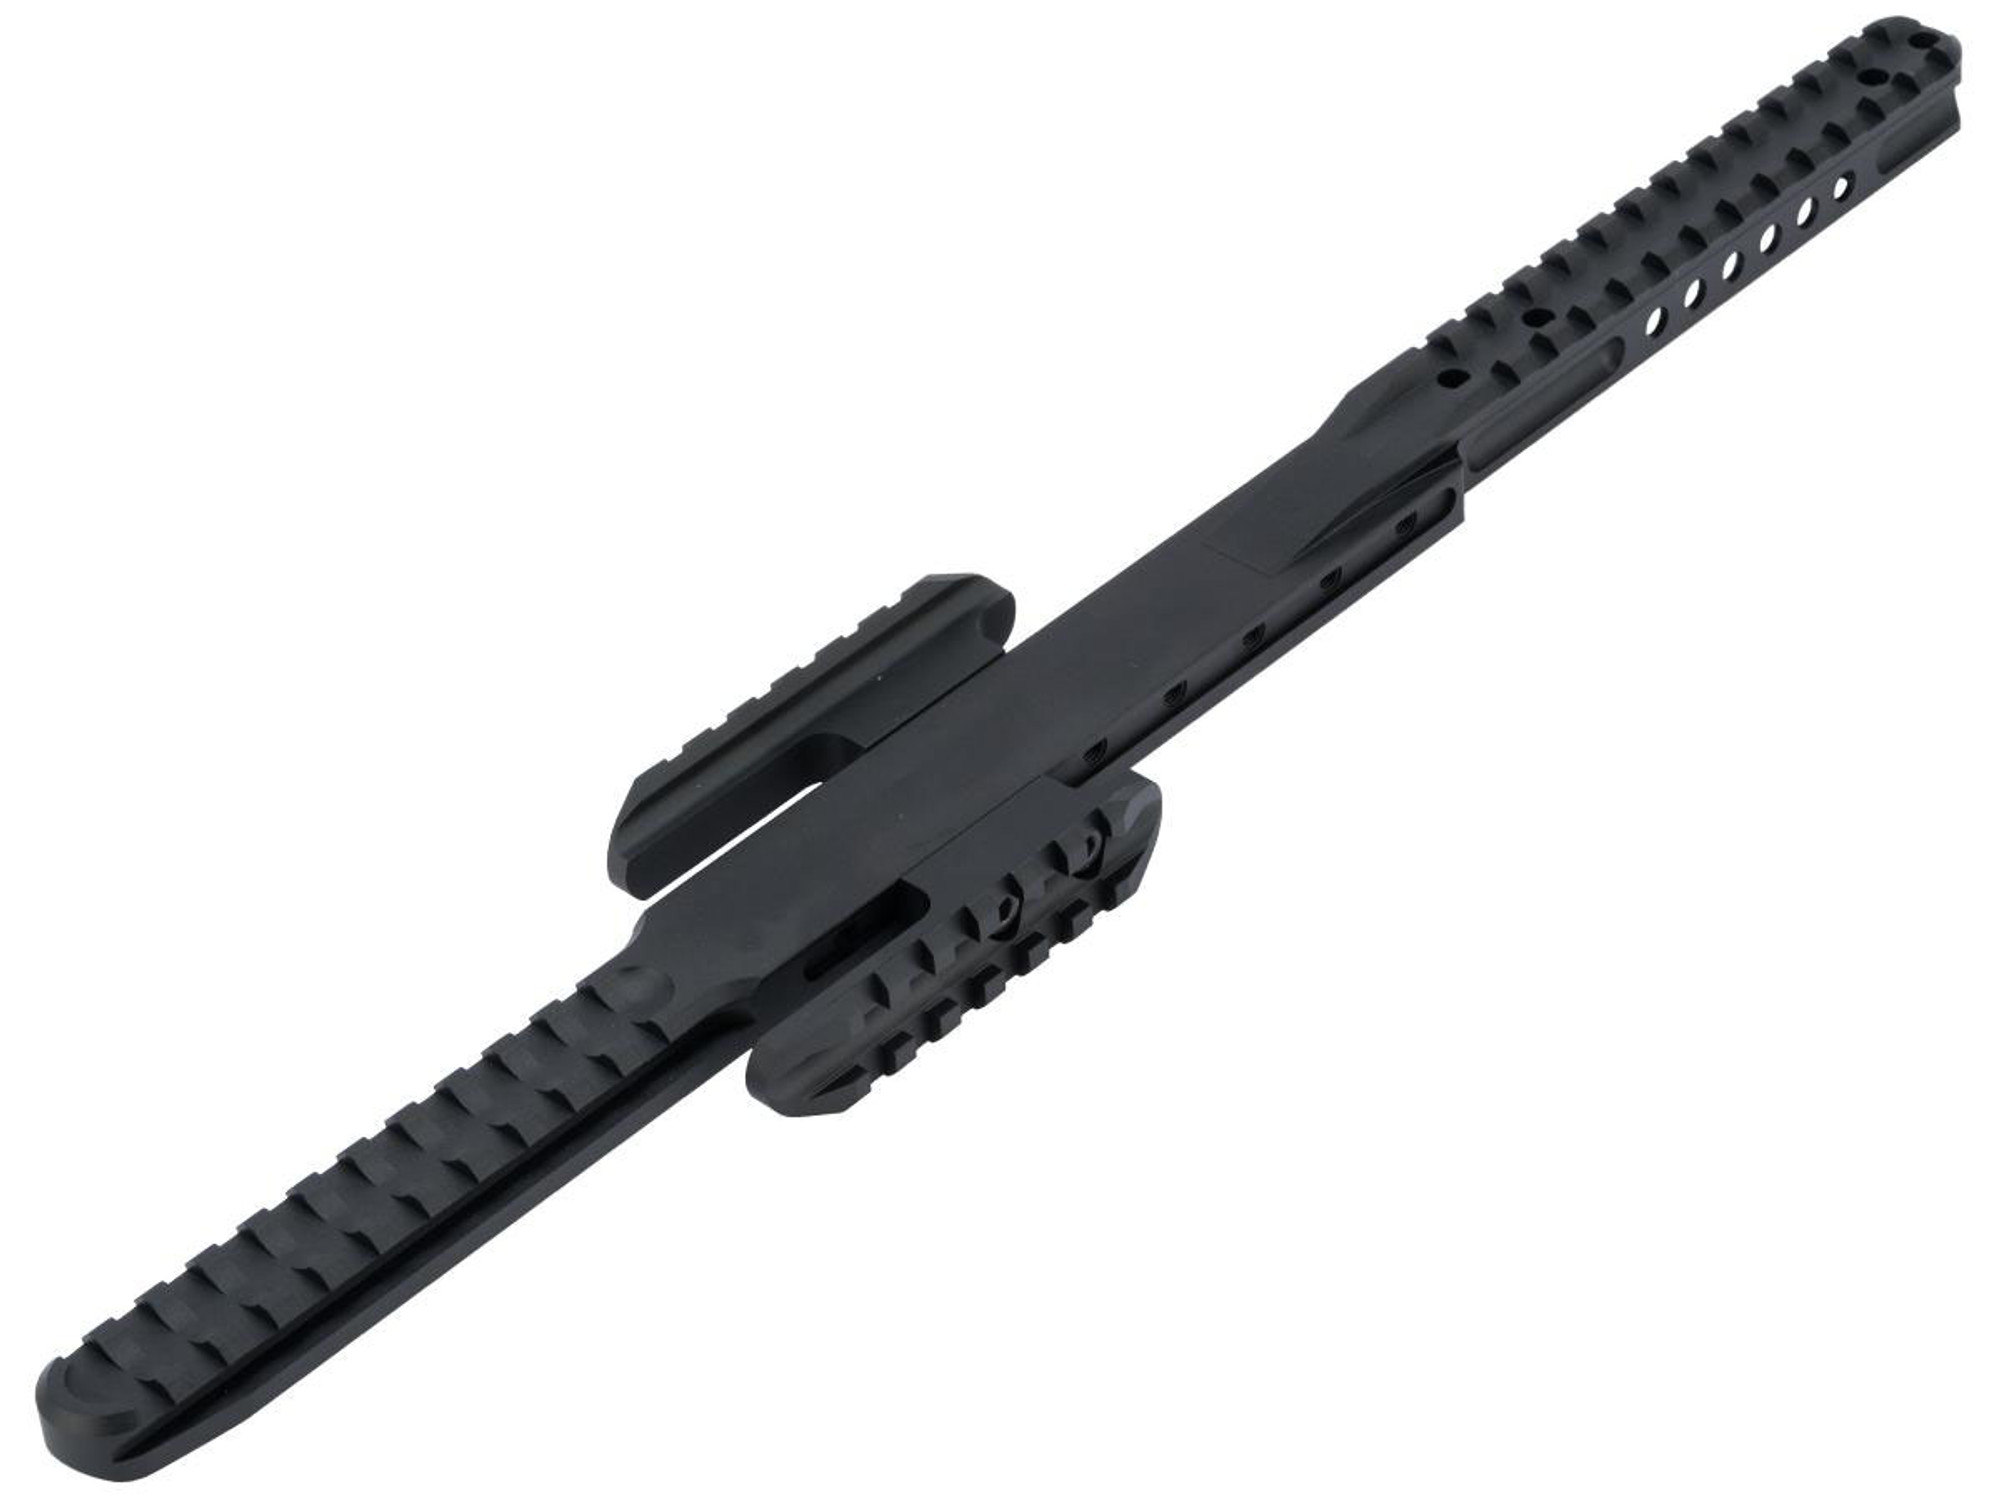 Action Army Extended Scope Rail for Tokyo Marui M40A5 Airsoft Sniper Rifles